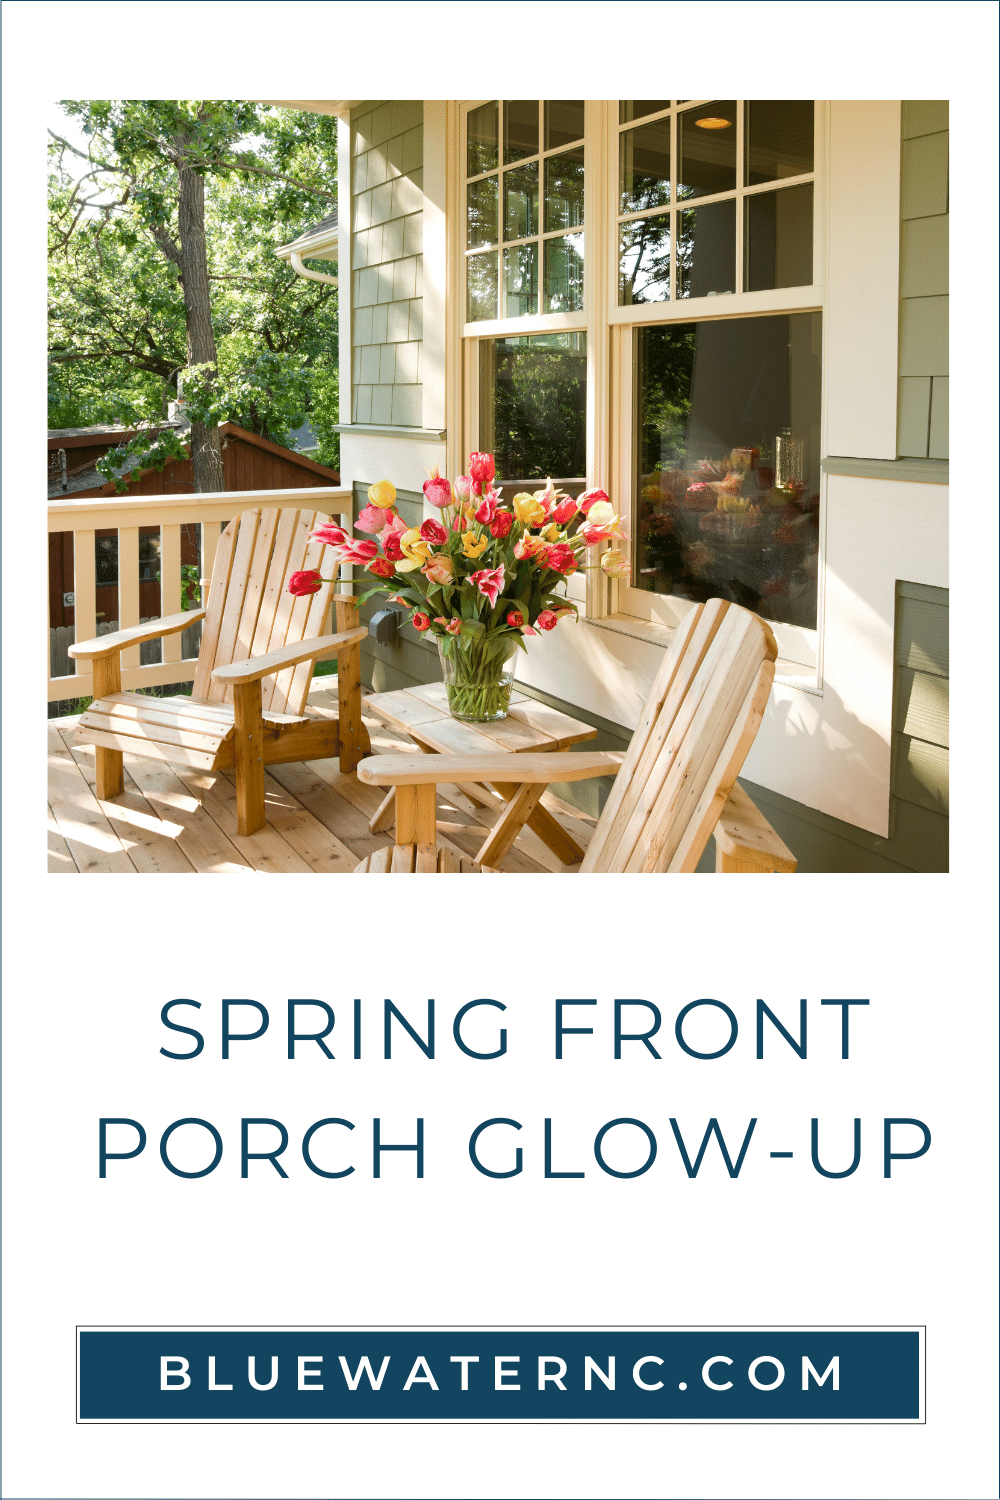 Spruce up your front porch this spring